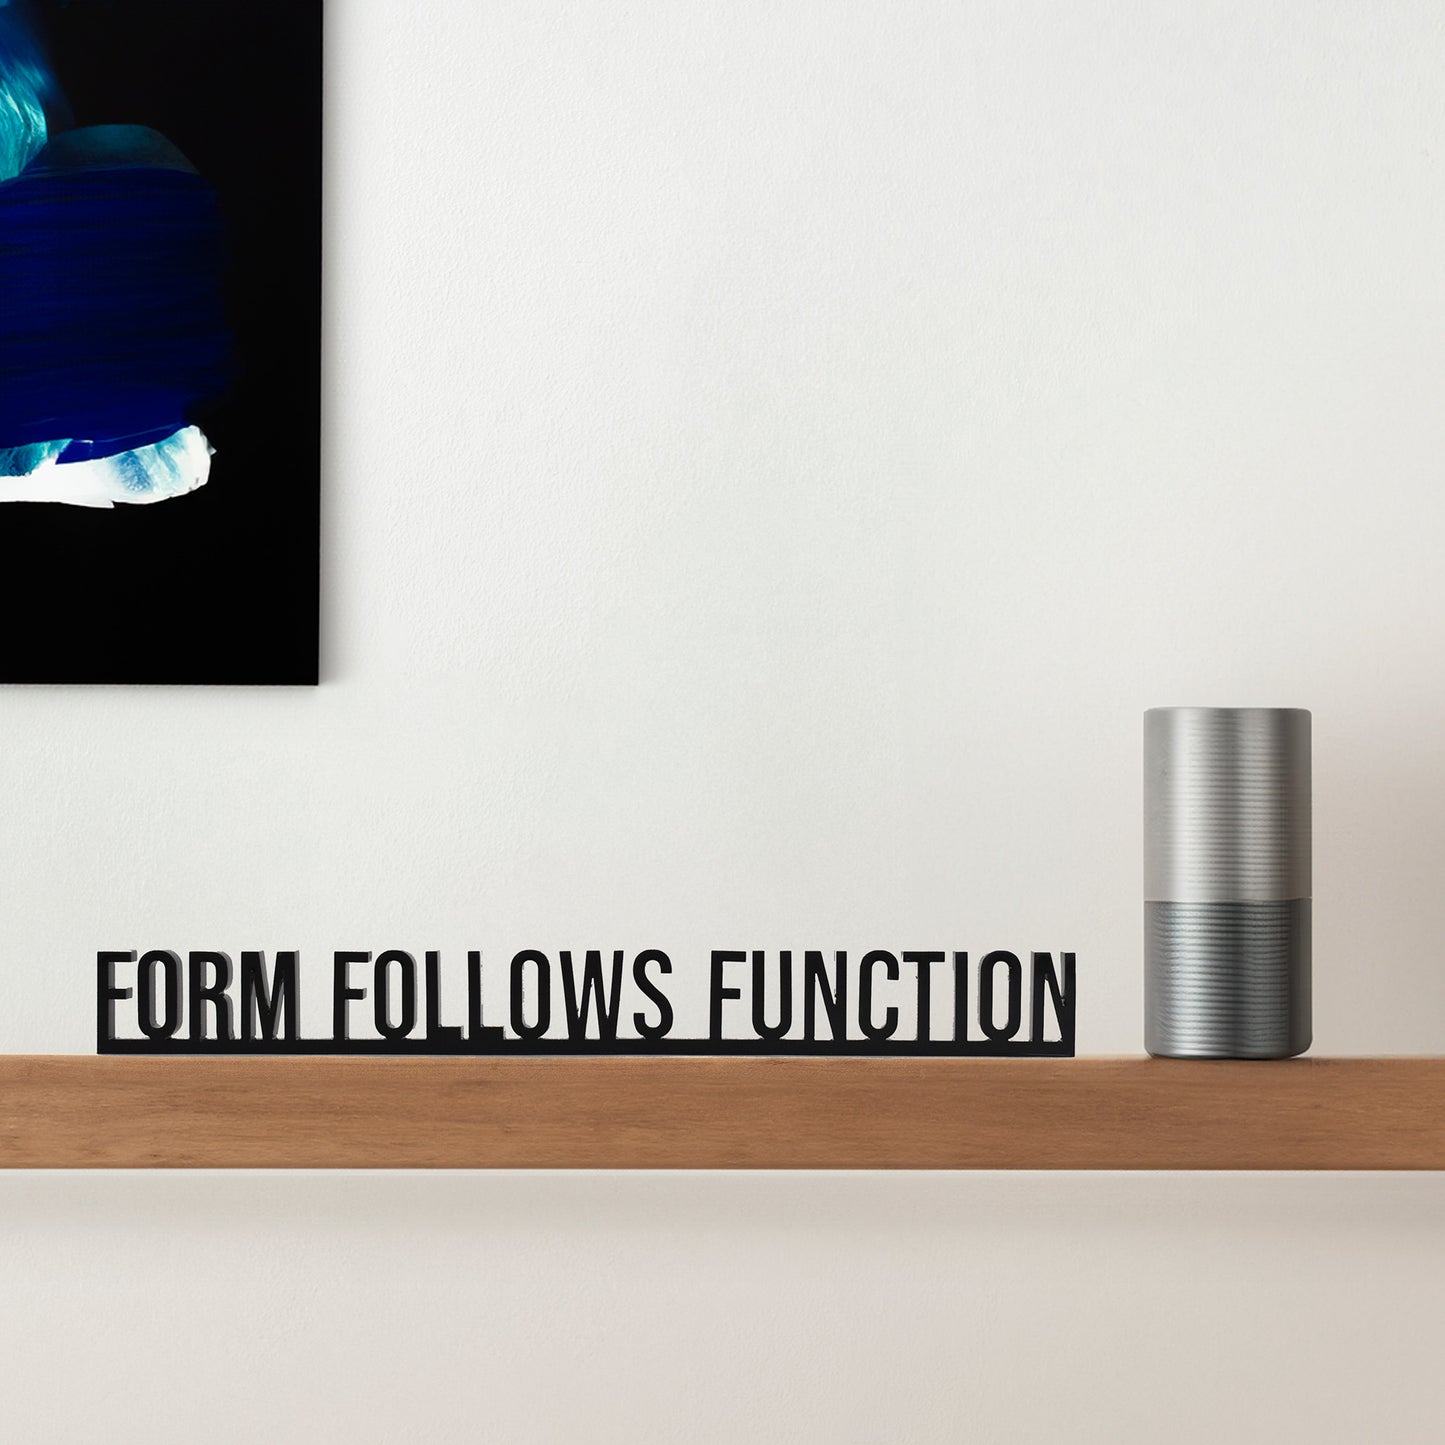 Architecture Quotes - Form Follows Function  beamalevich architecture gift design gift art gift